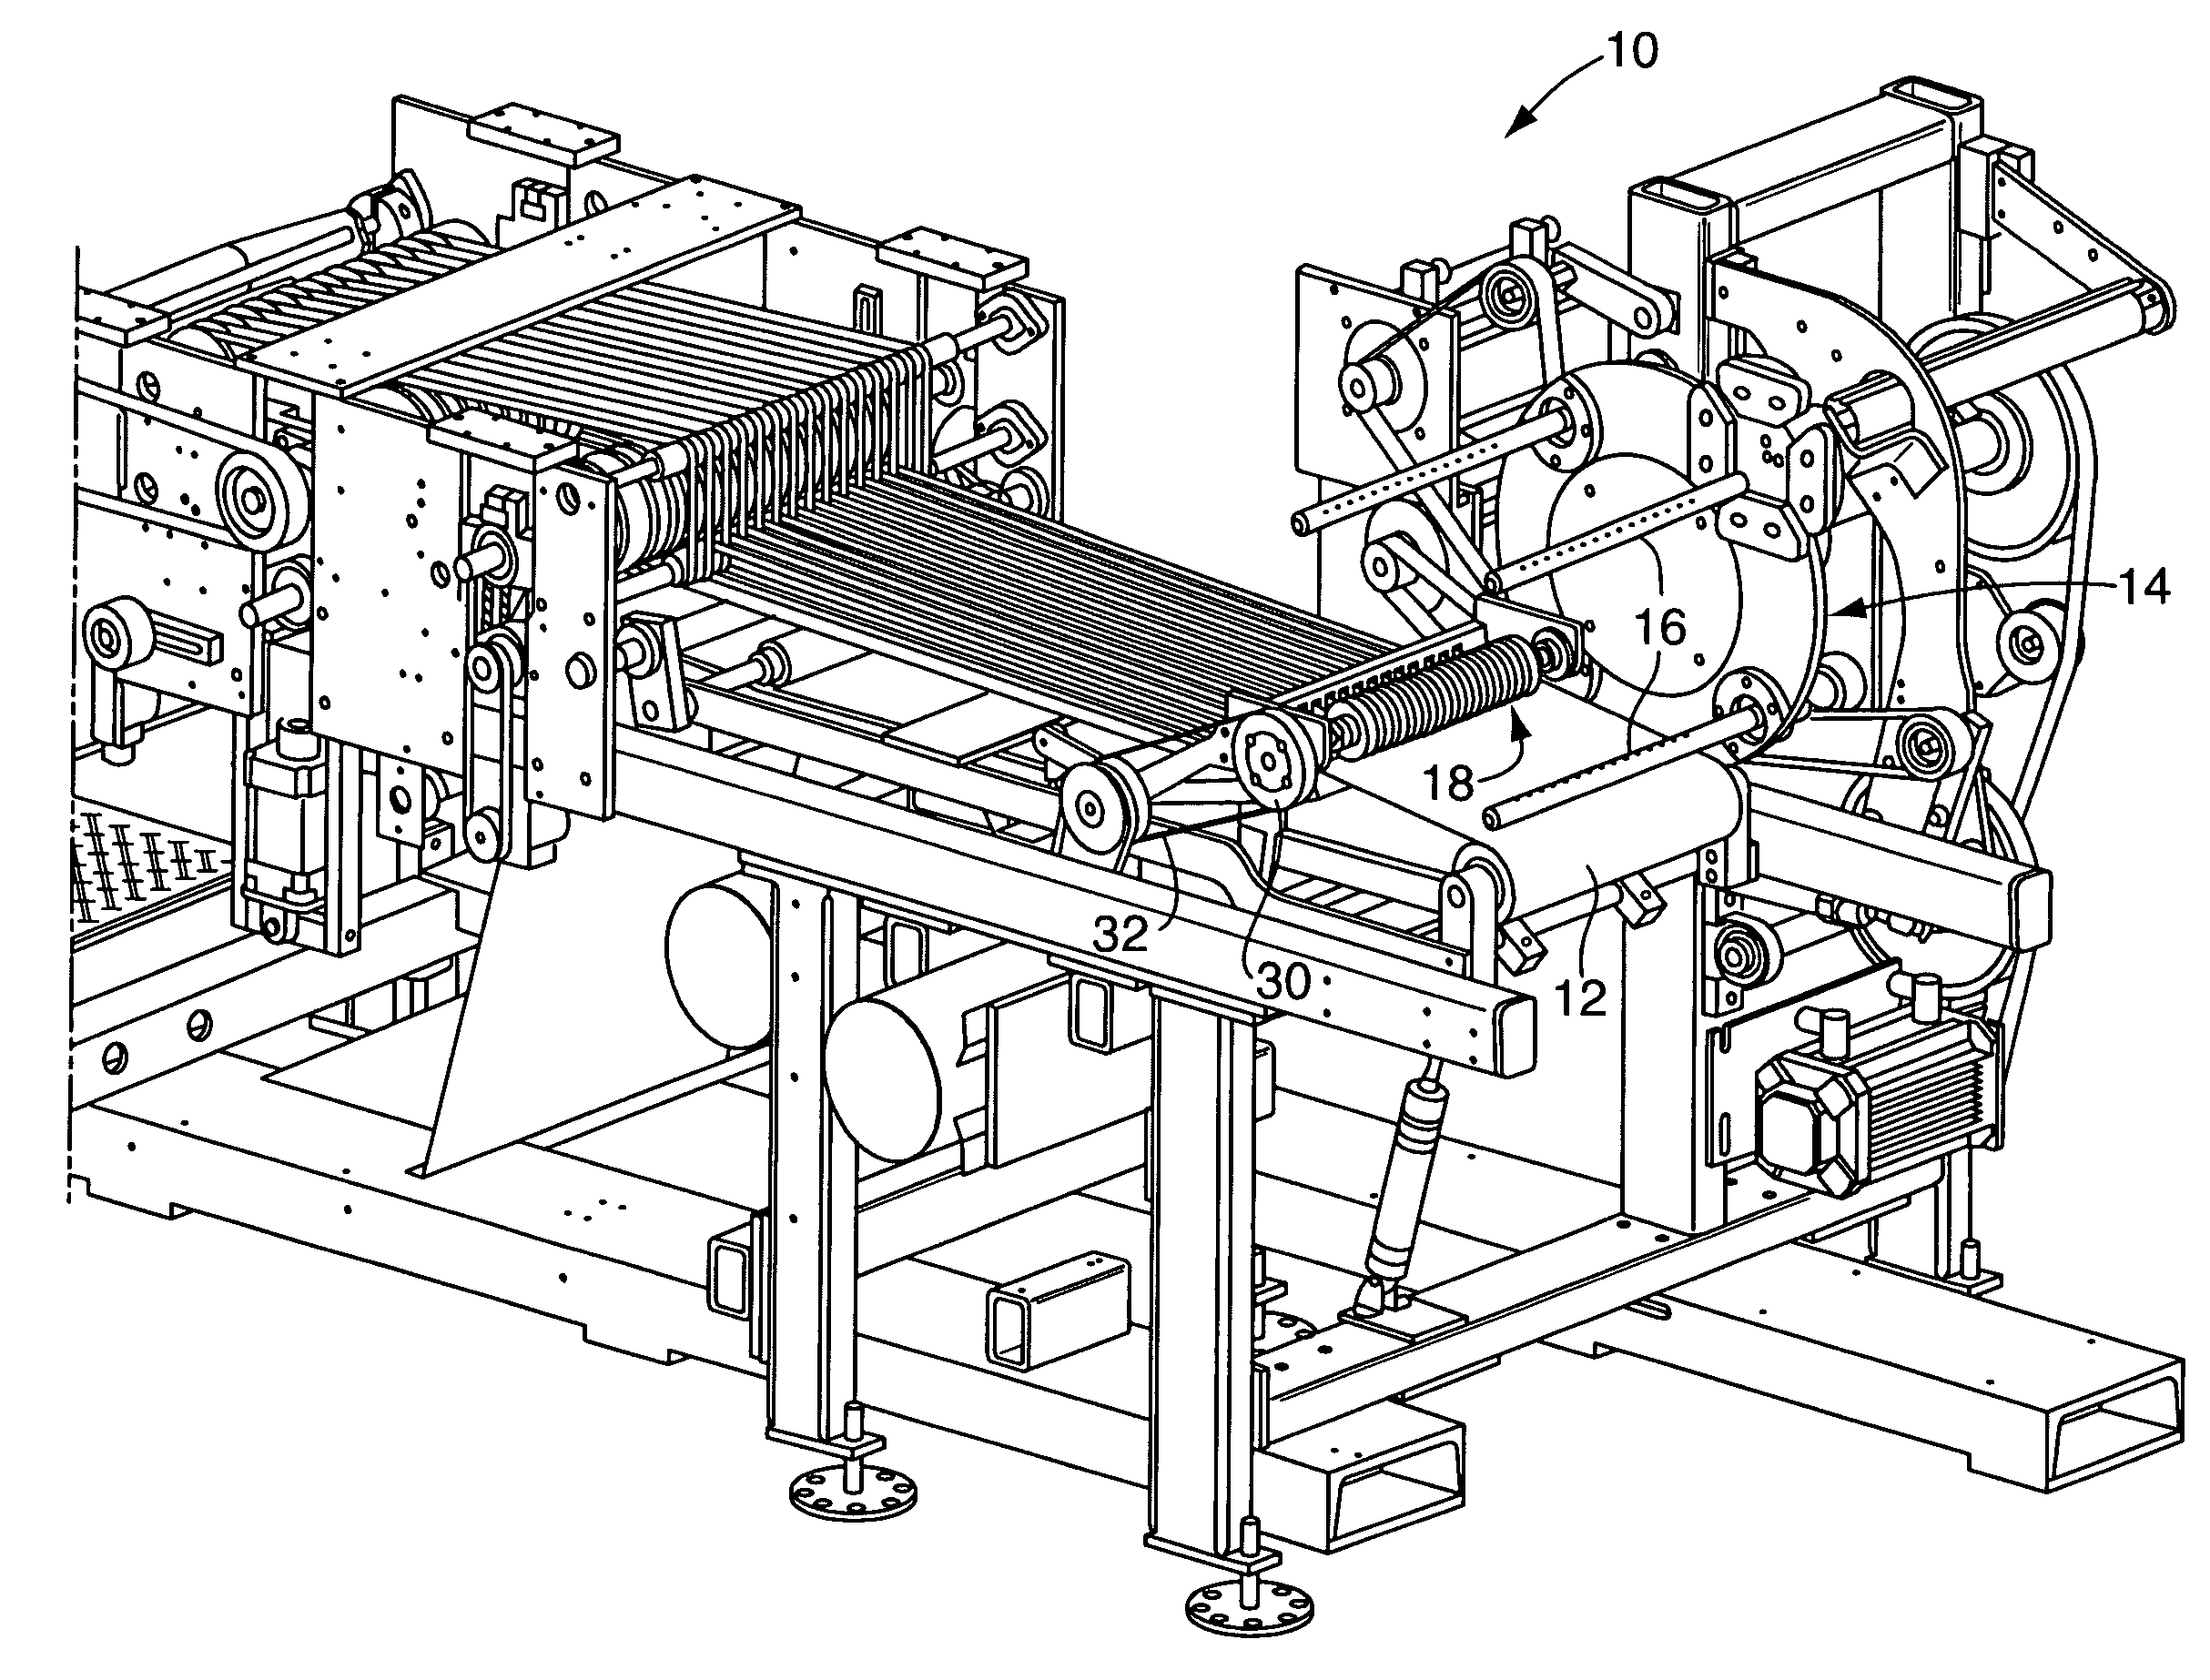 Winder apparatus with transfer brush roll